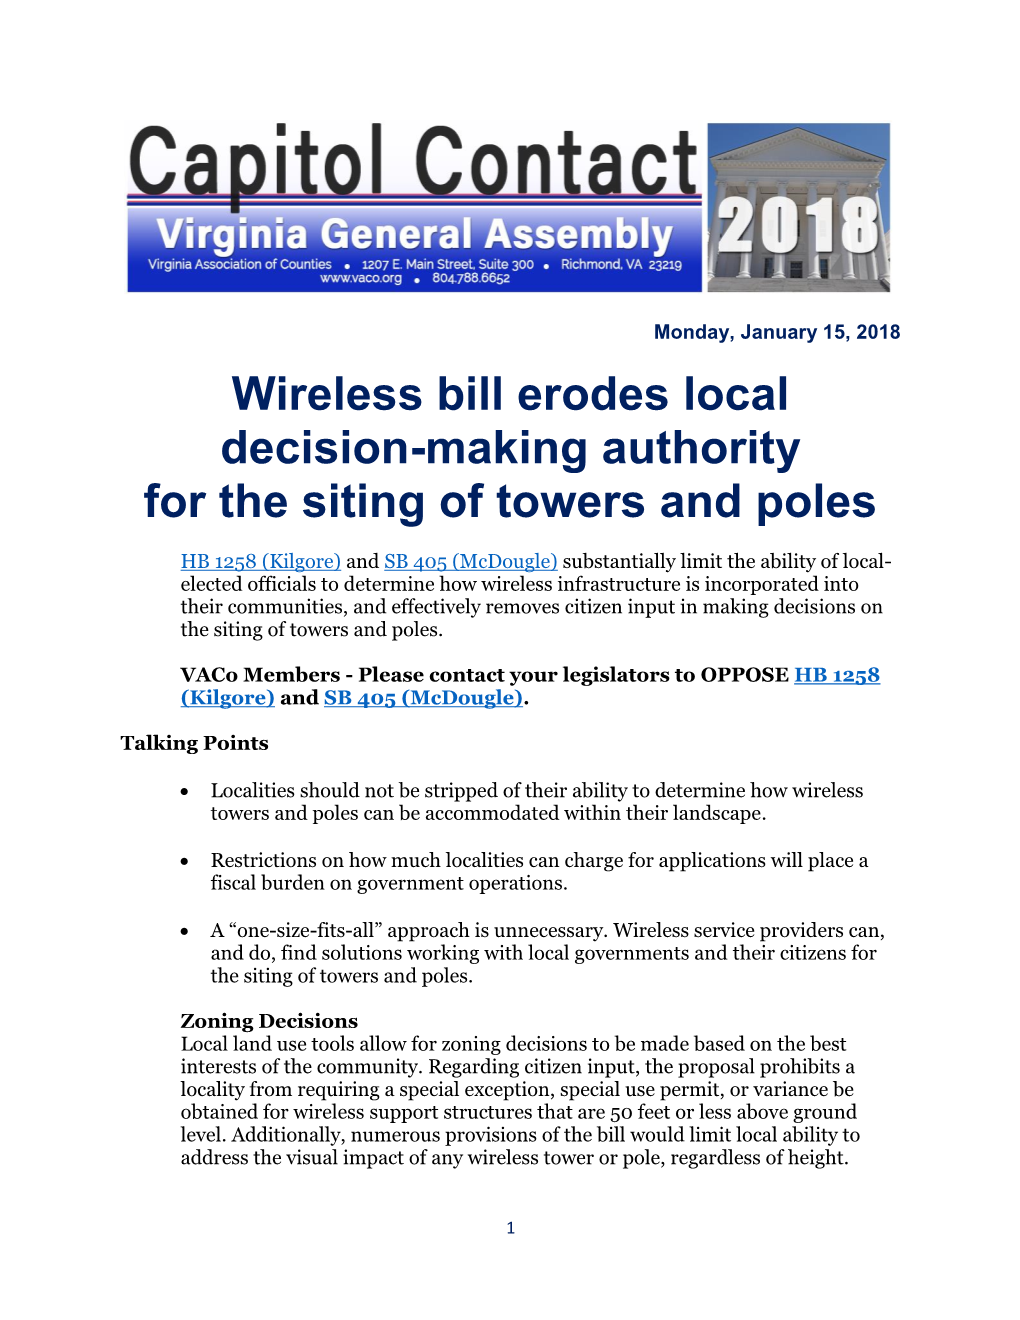 Wireless Bill Erodes Local Decision-Making Authority for the Siting of Towers and Poles